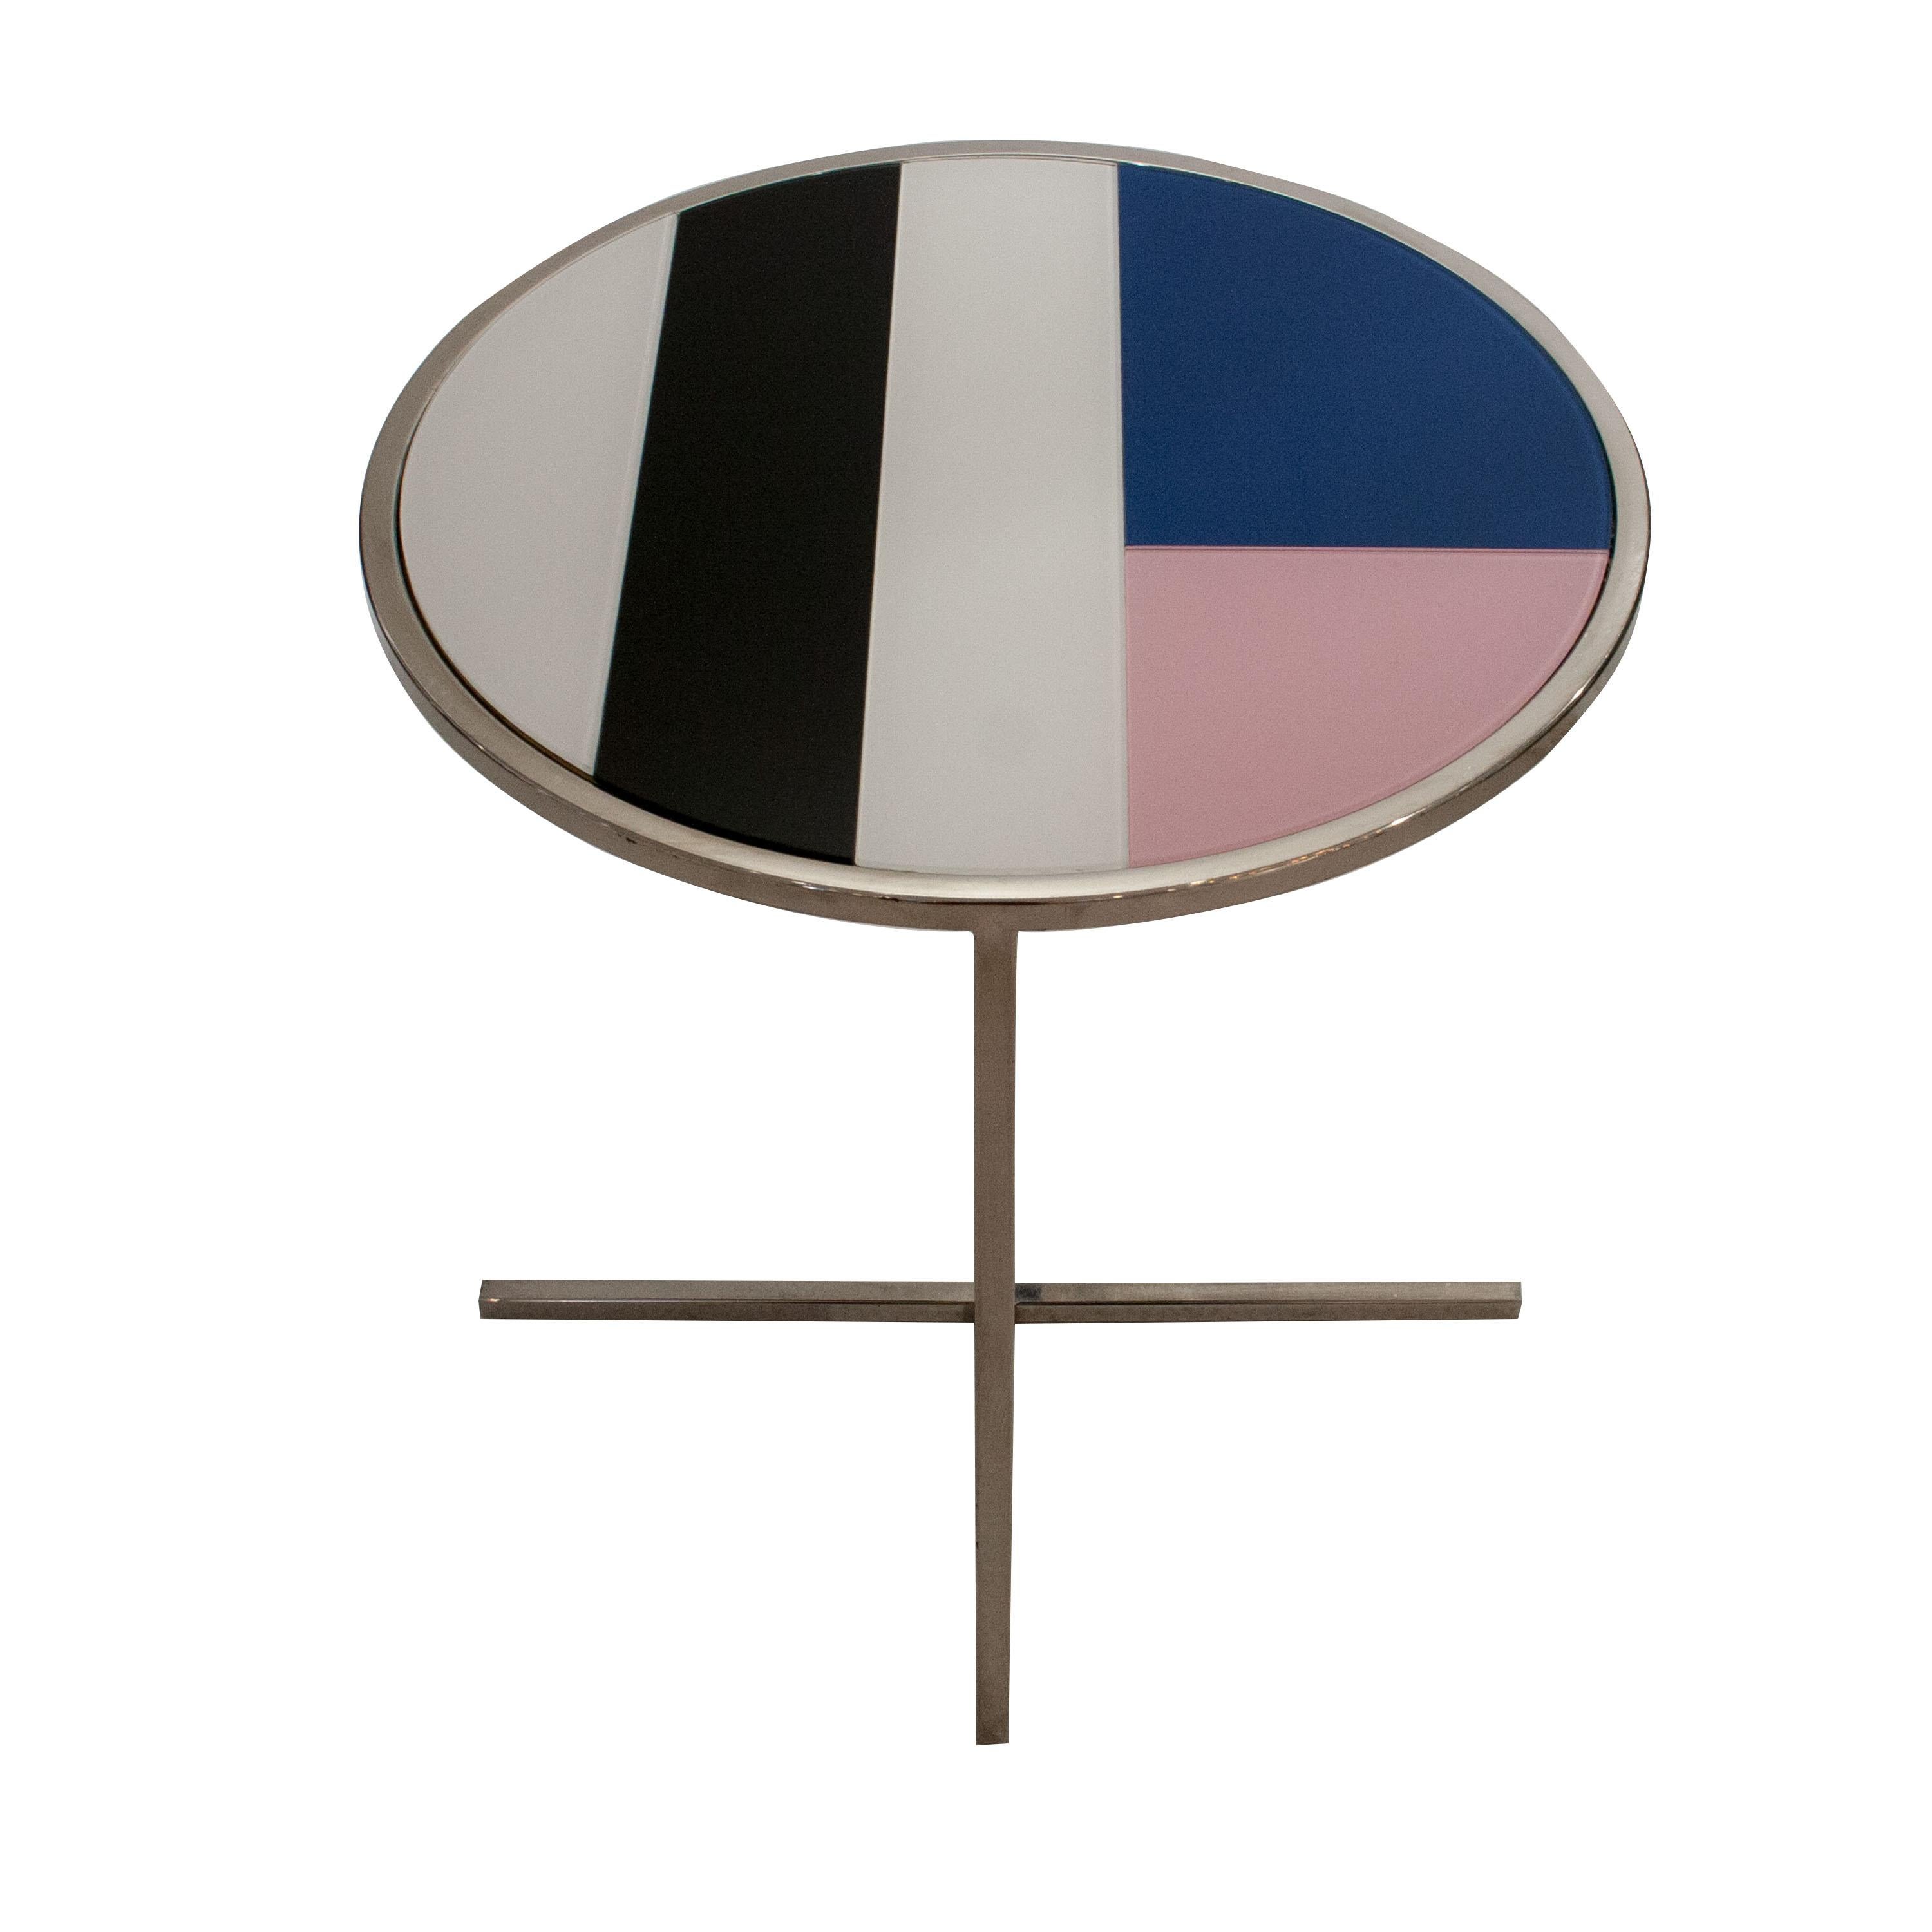 1970´s original side table with a chromed steel structure and an actual glass top designed by IKB191 in white, blue, black and pink.